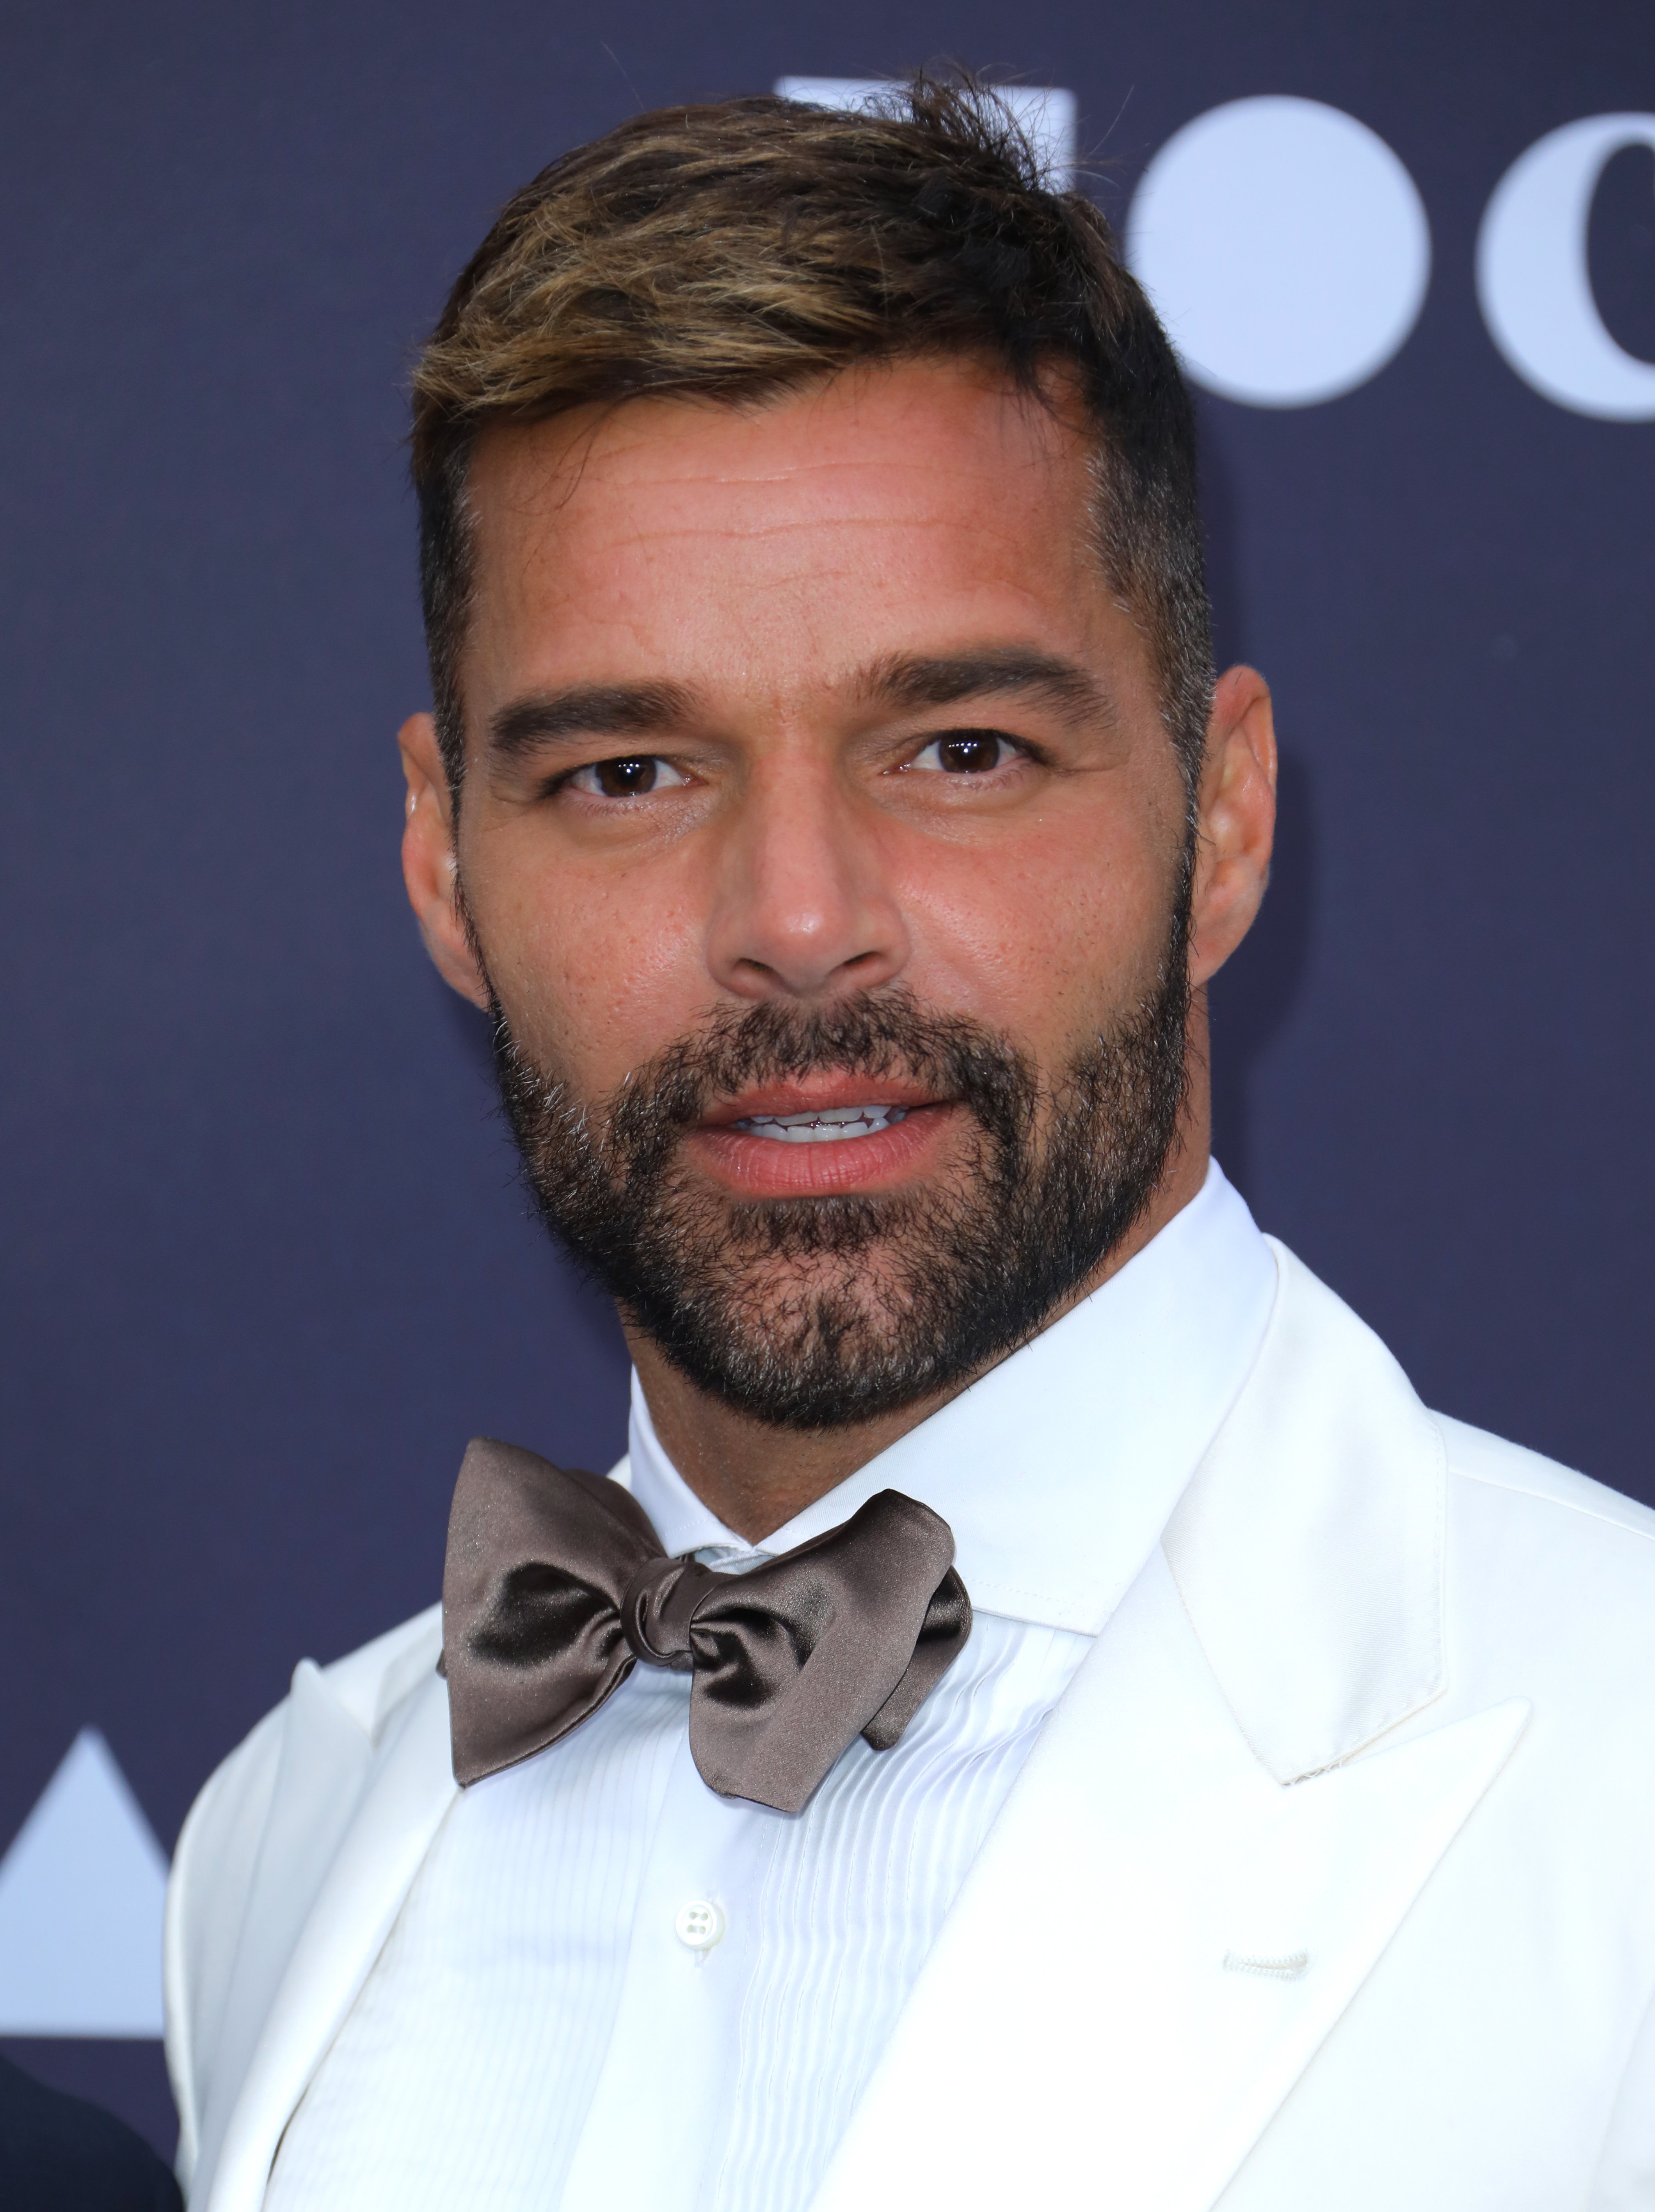 Ricky Martin attends the MOCA Benefit 2019 at The Geffen Contemporary at MOCA on May 18, 2019 in Los Angeles, California | Photo: Getty Images